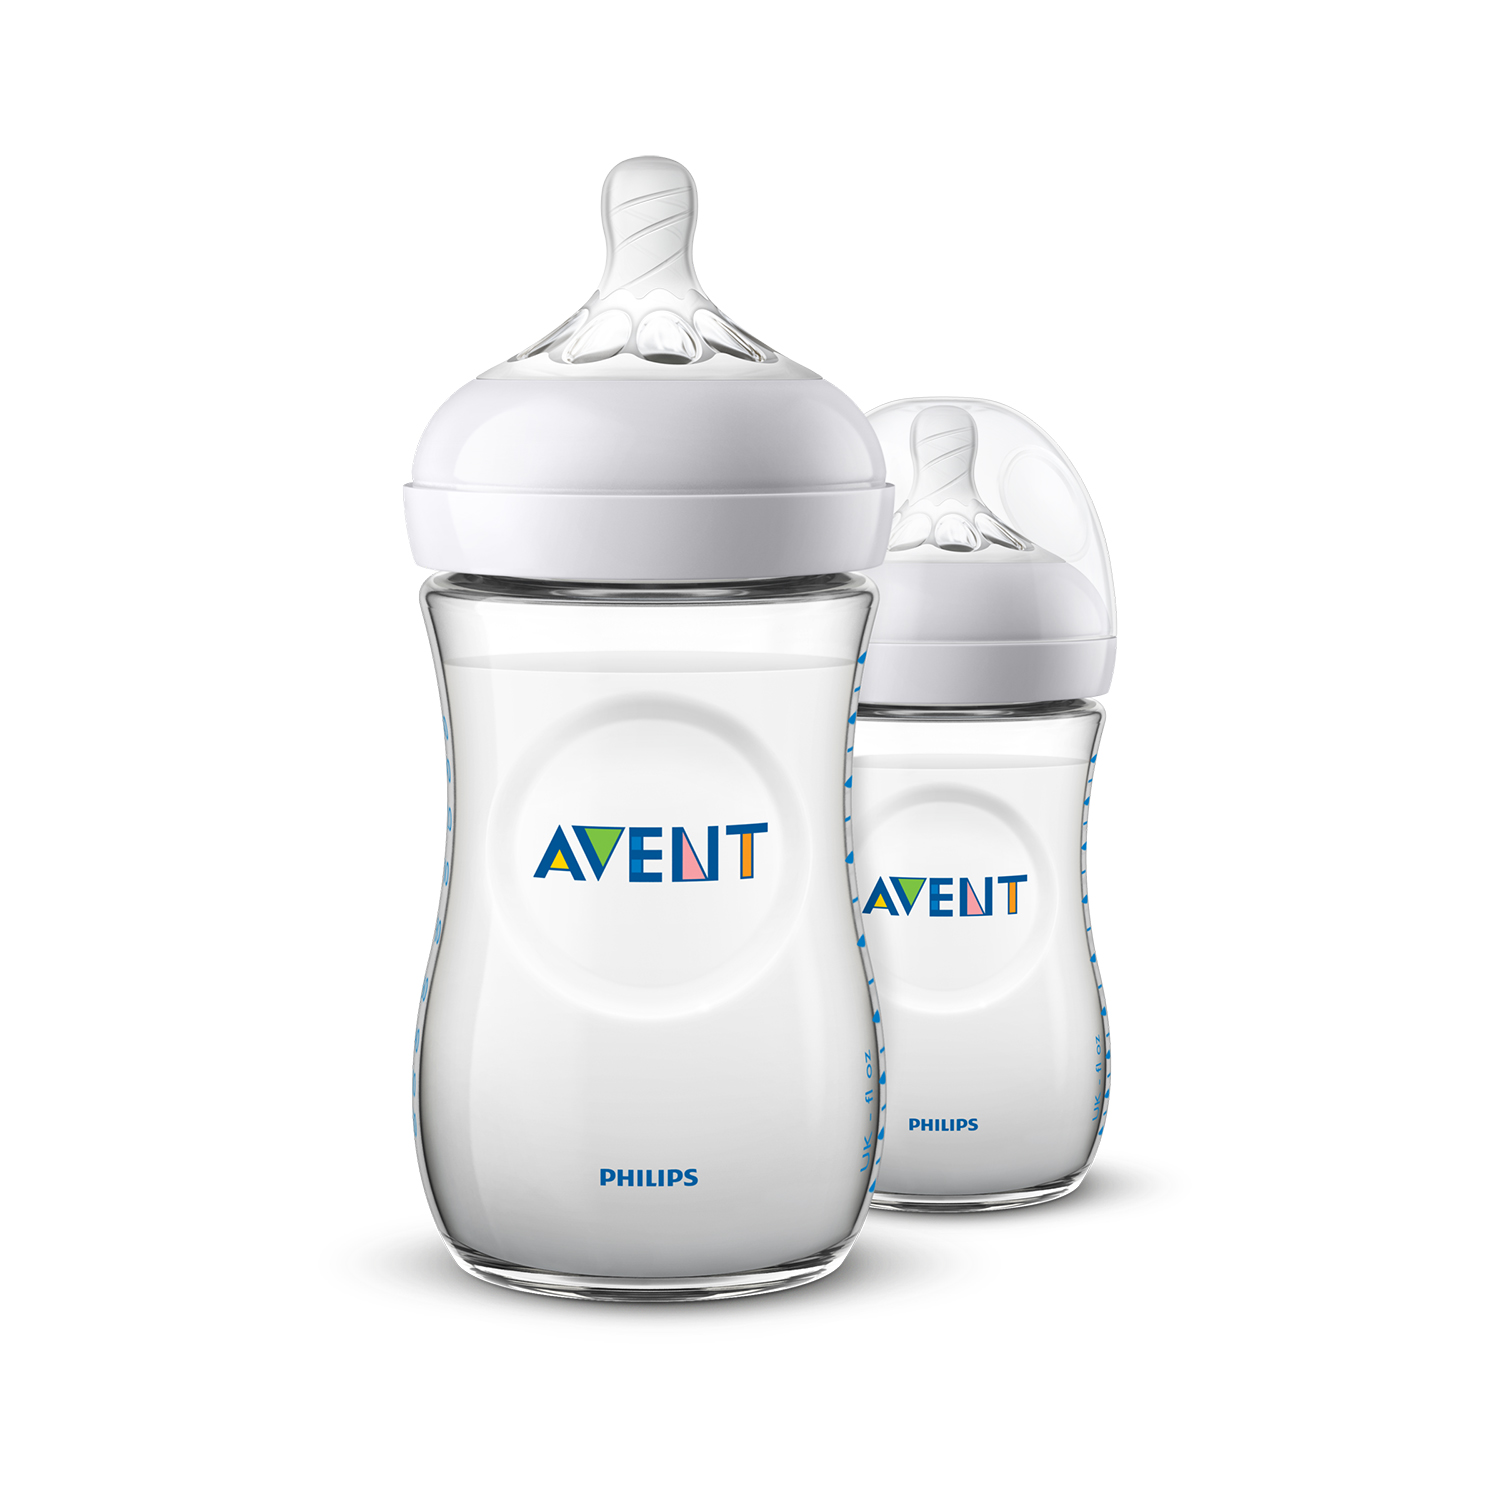 Afbeelding Avent Natural zuigfles I 260ml DUO